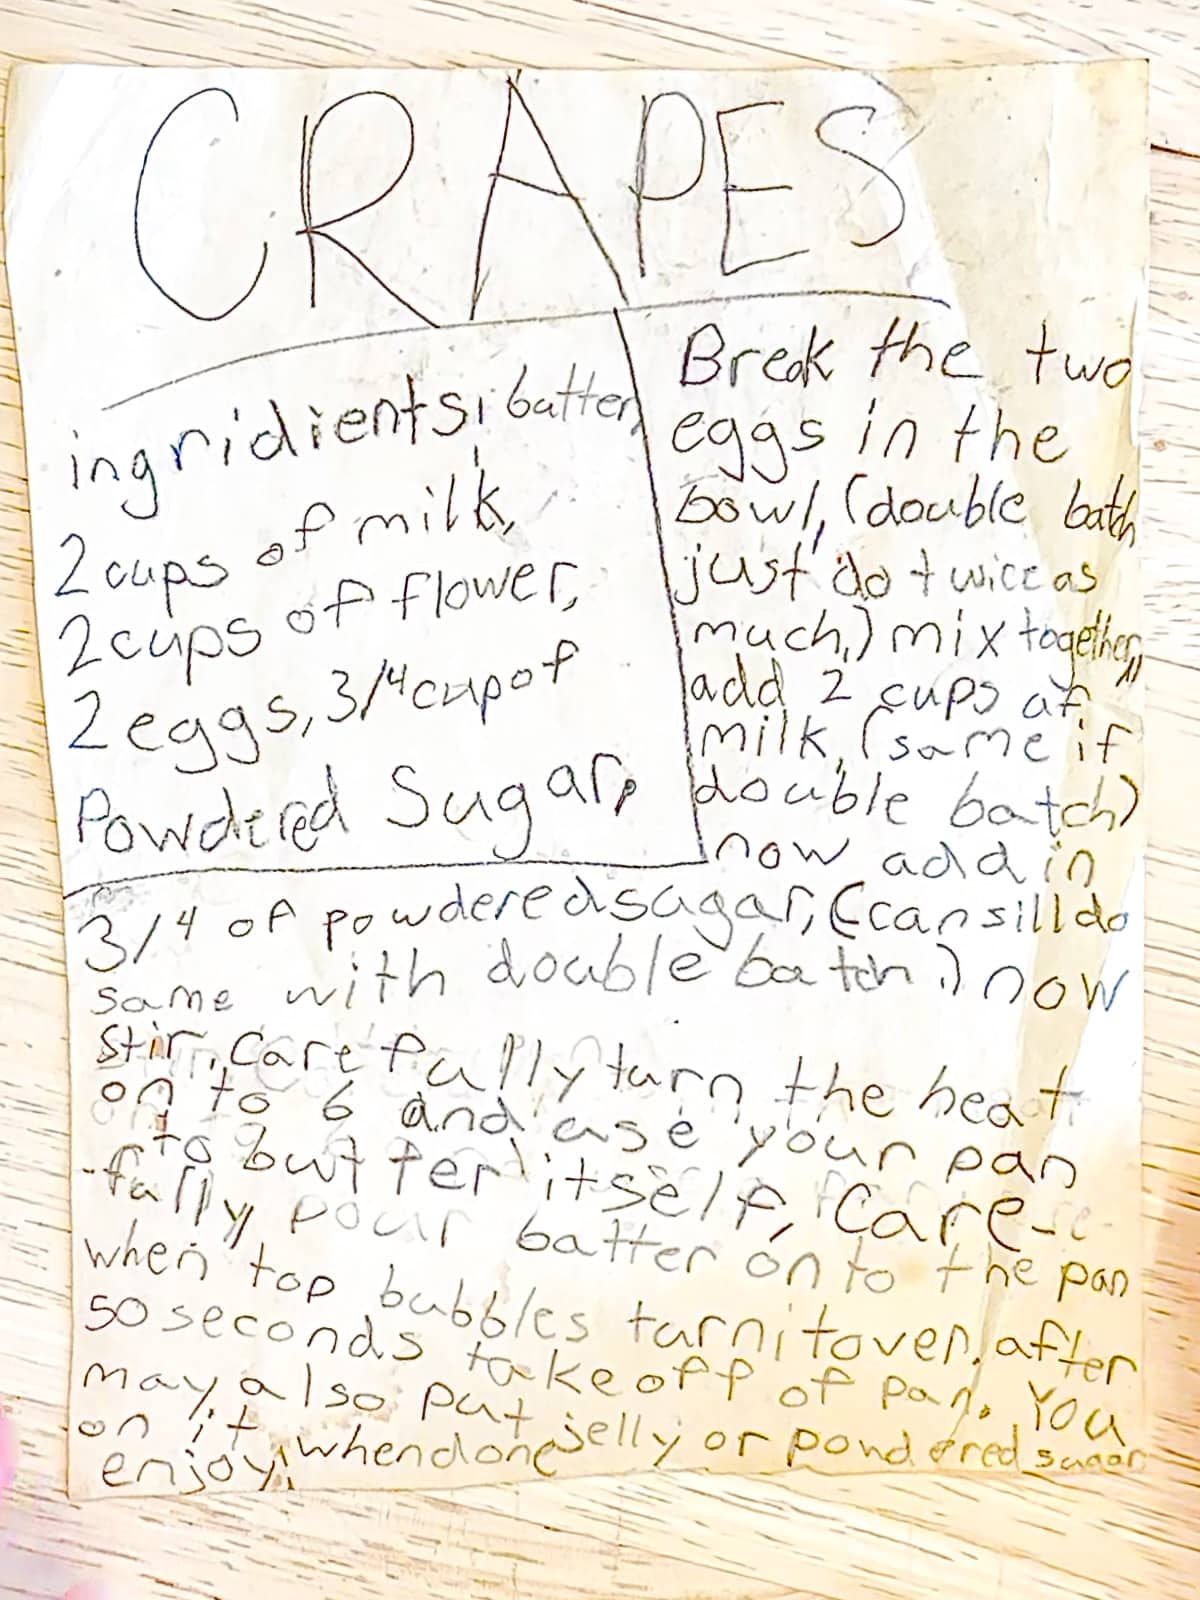 A crêpes recipe written in a children's handwriting on old paper.